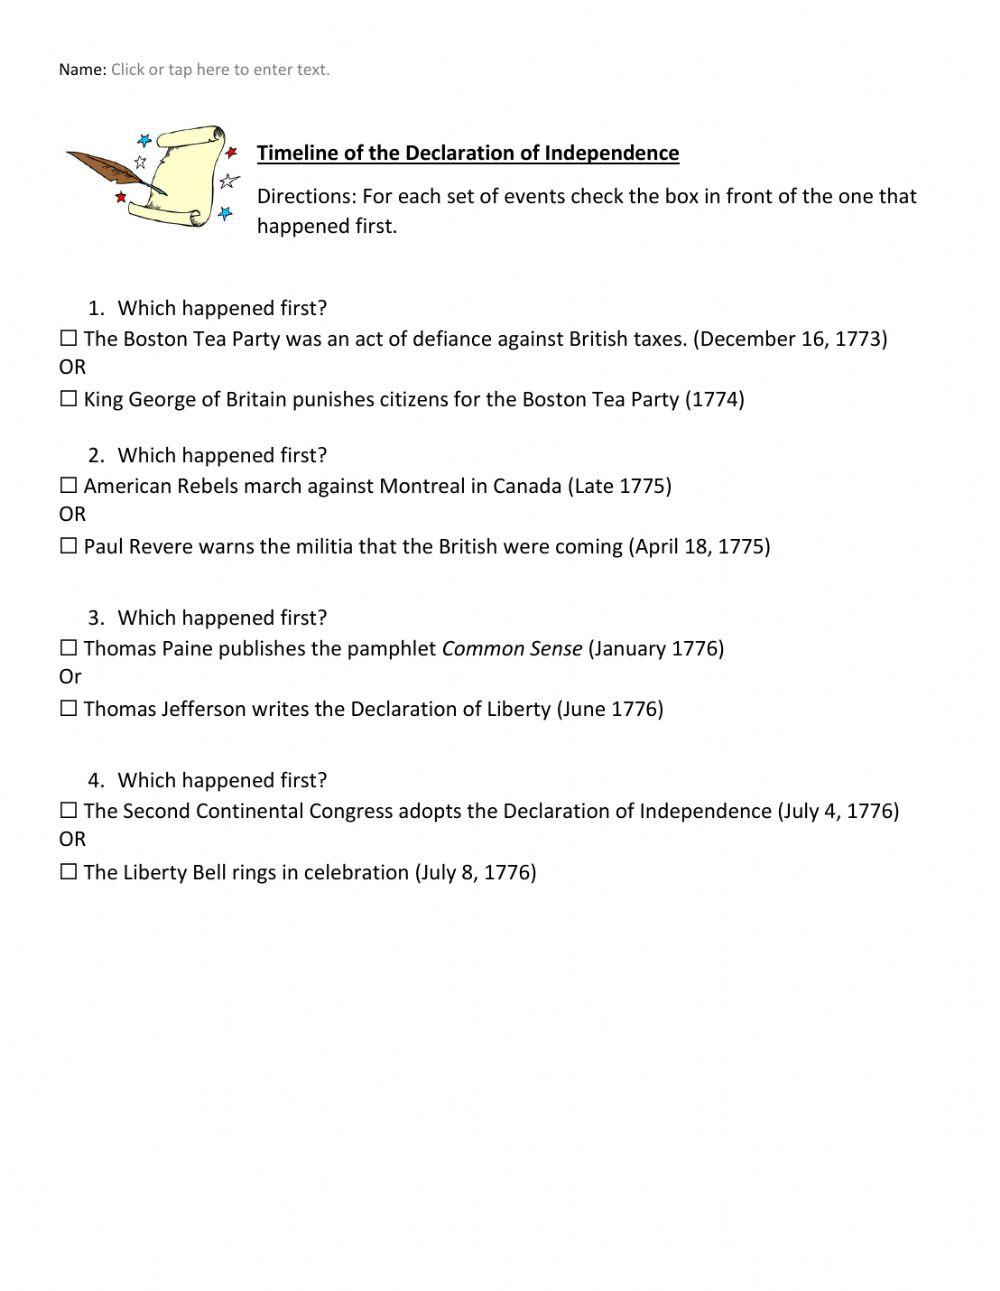 Declaration of Independence Timeline with dates